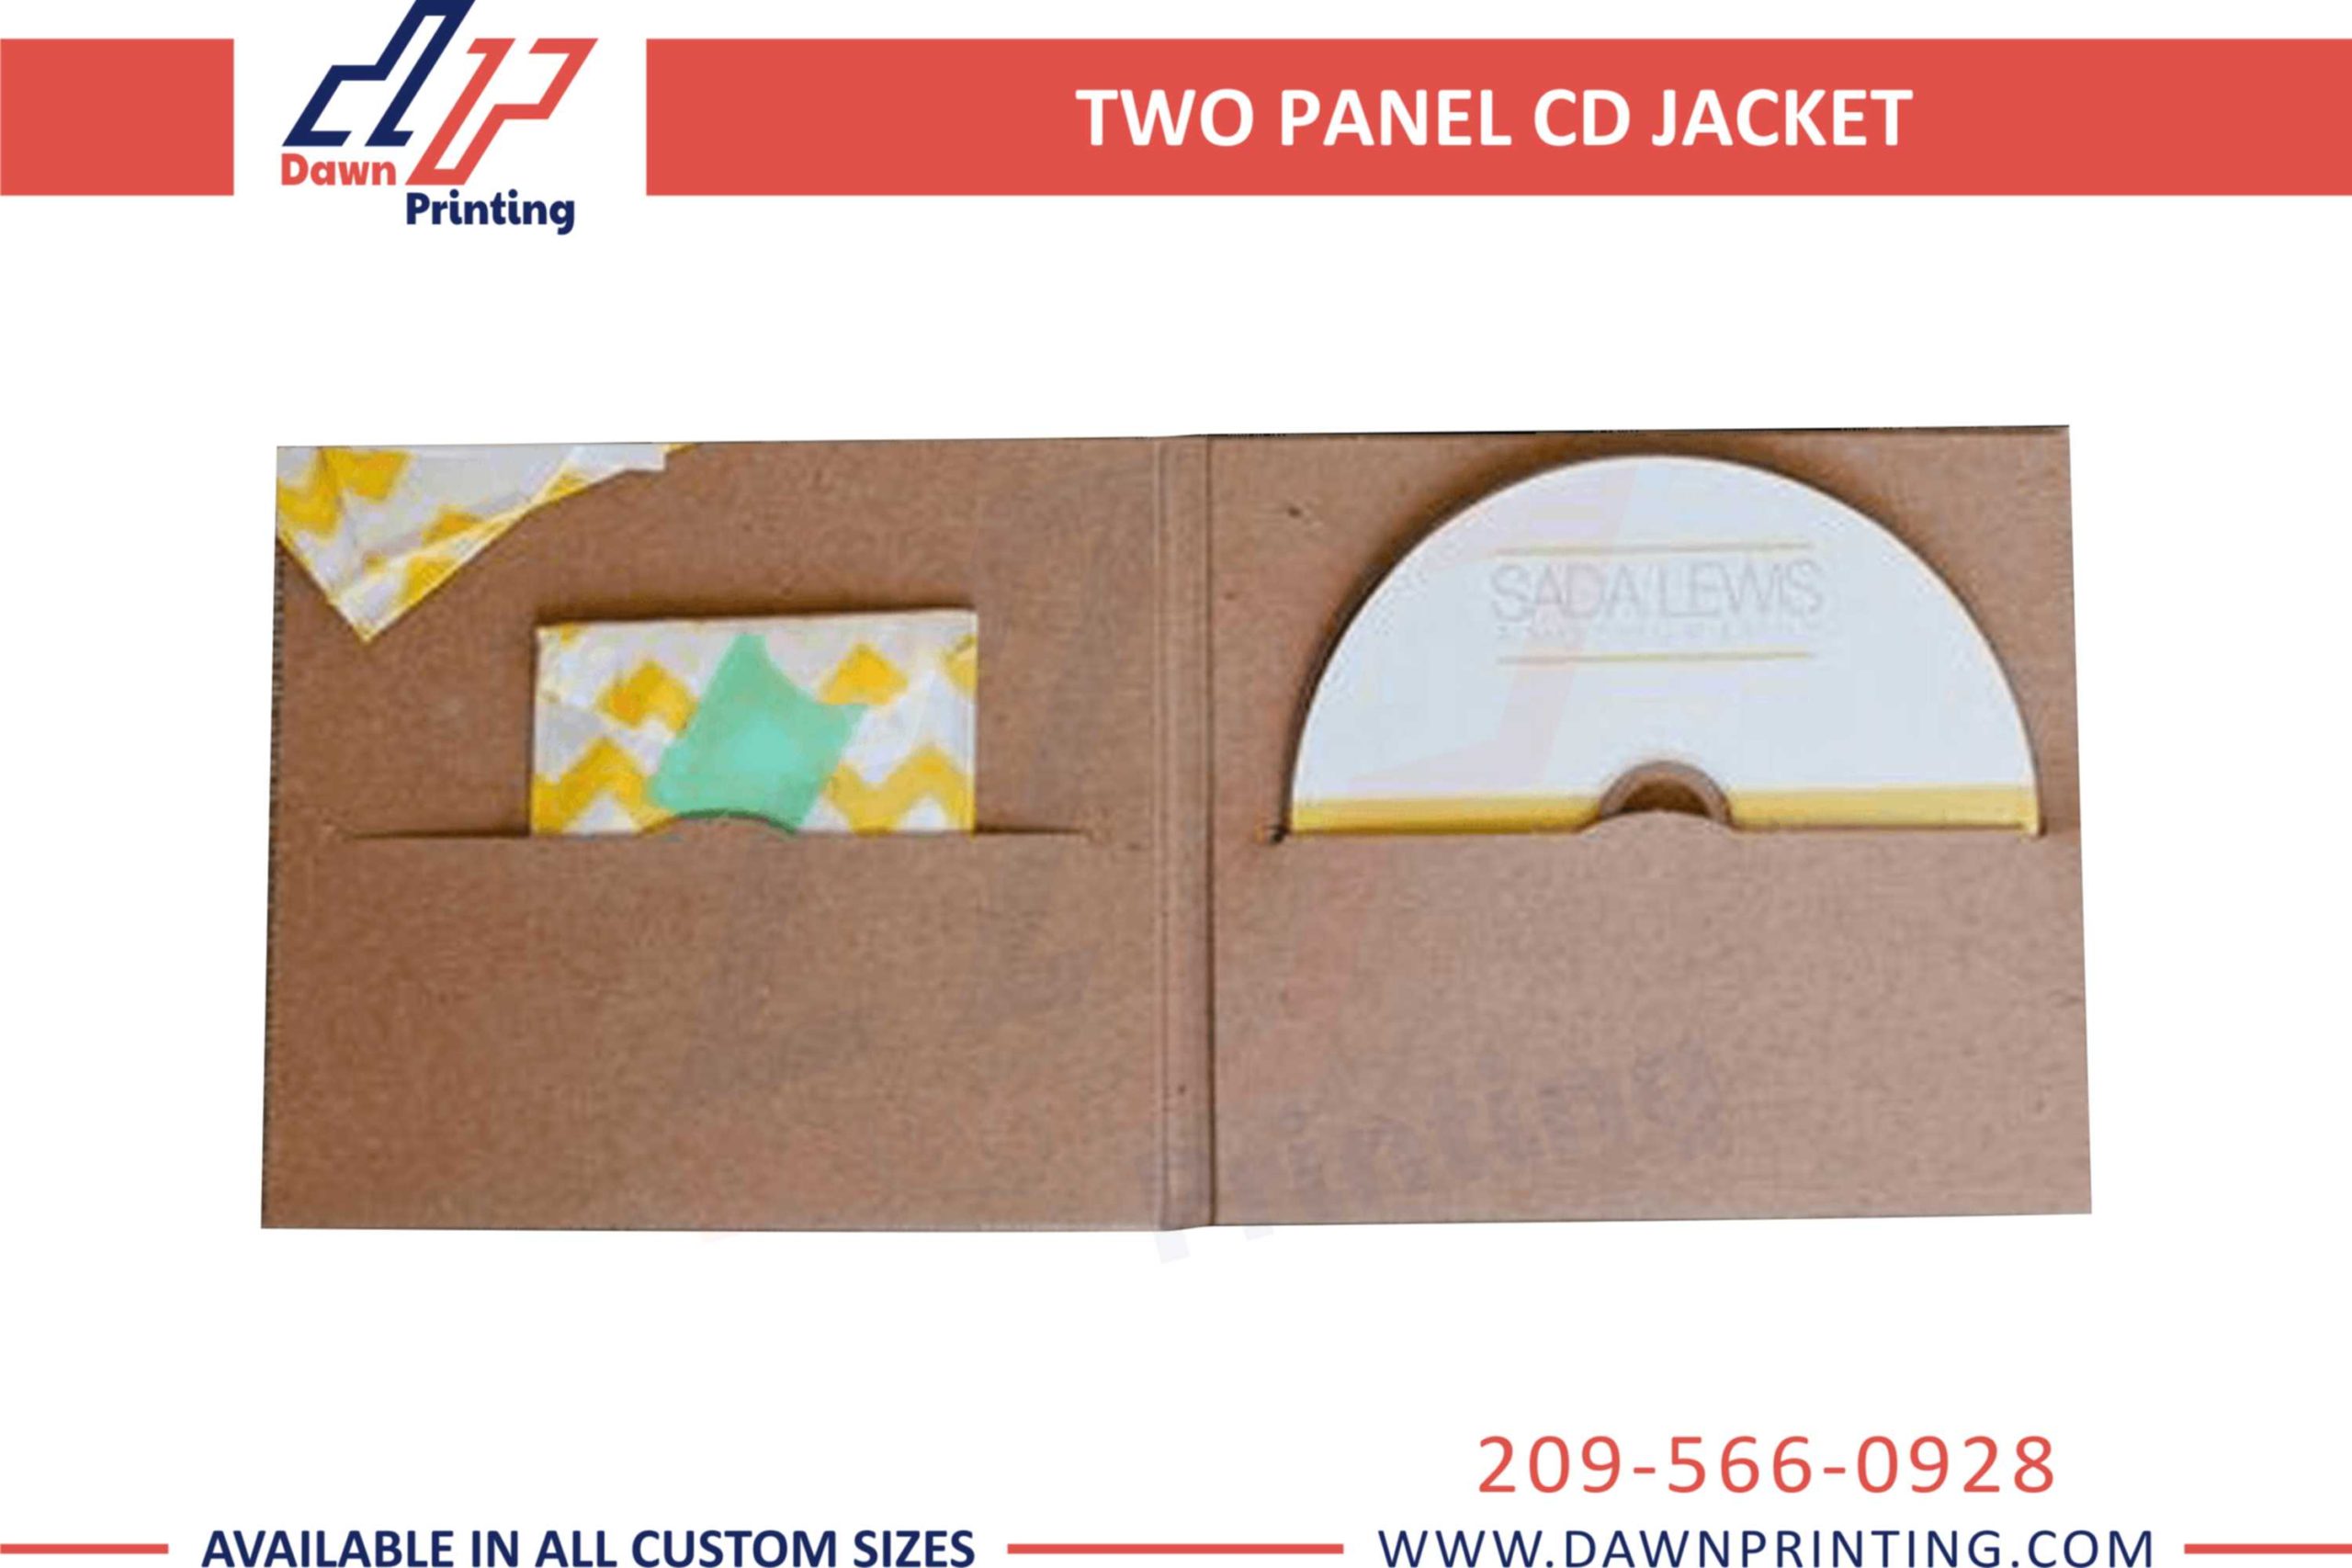 Two Panel DVD Packaging Jackets - Dawn Printing